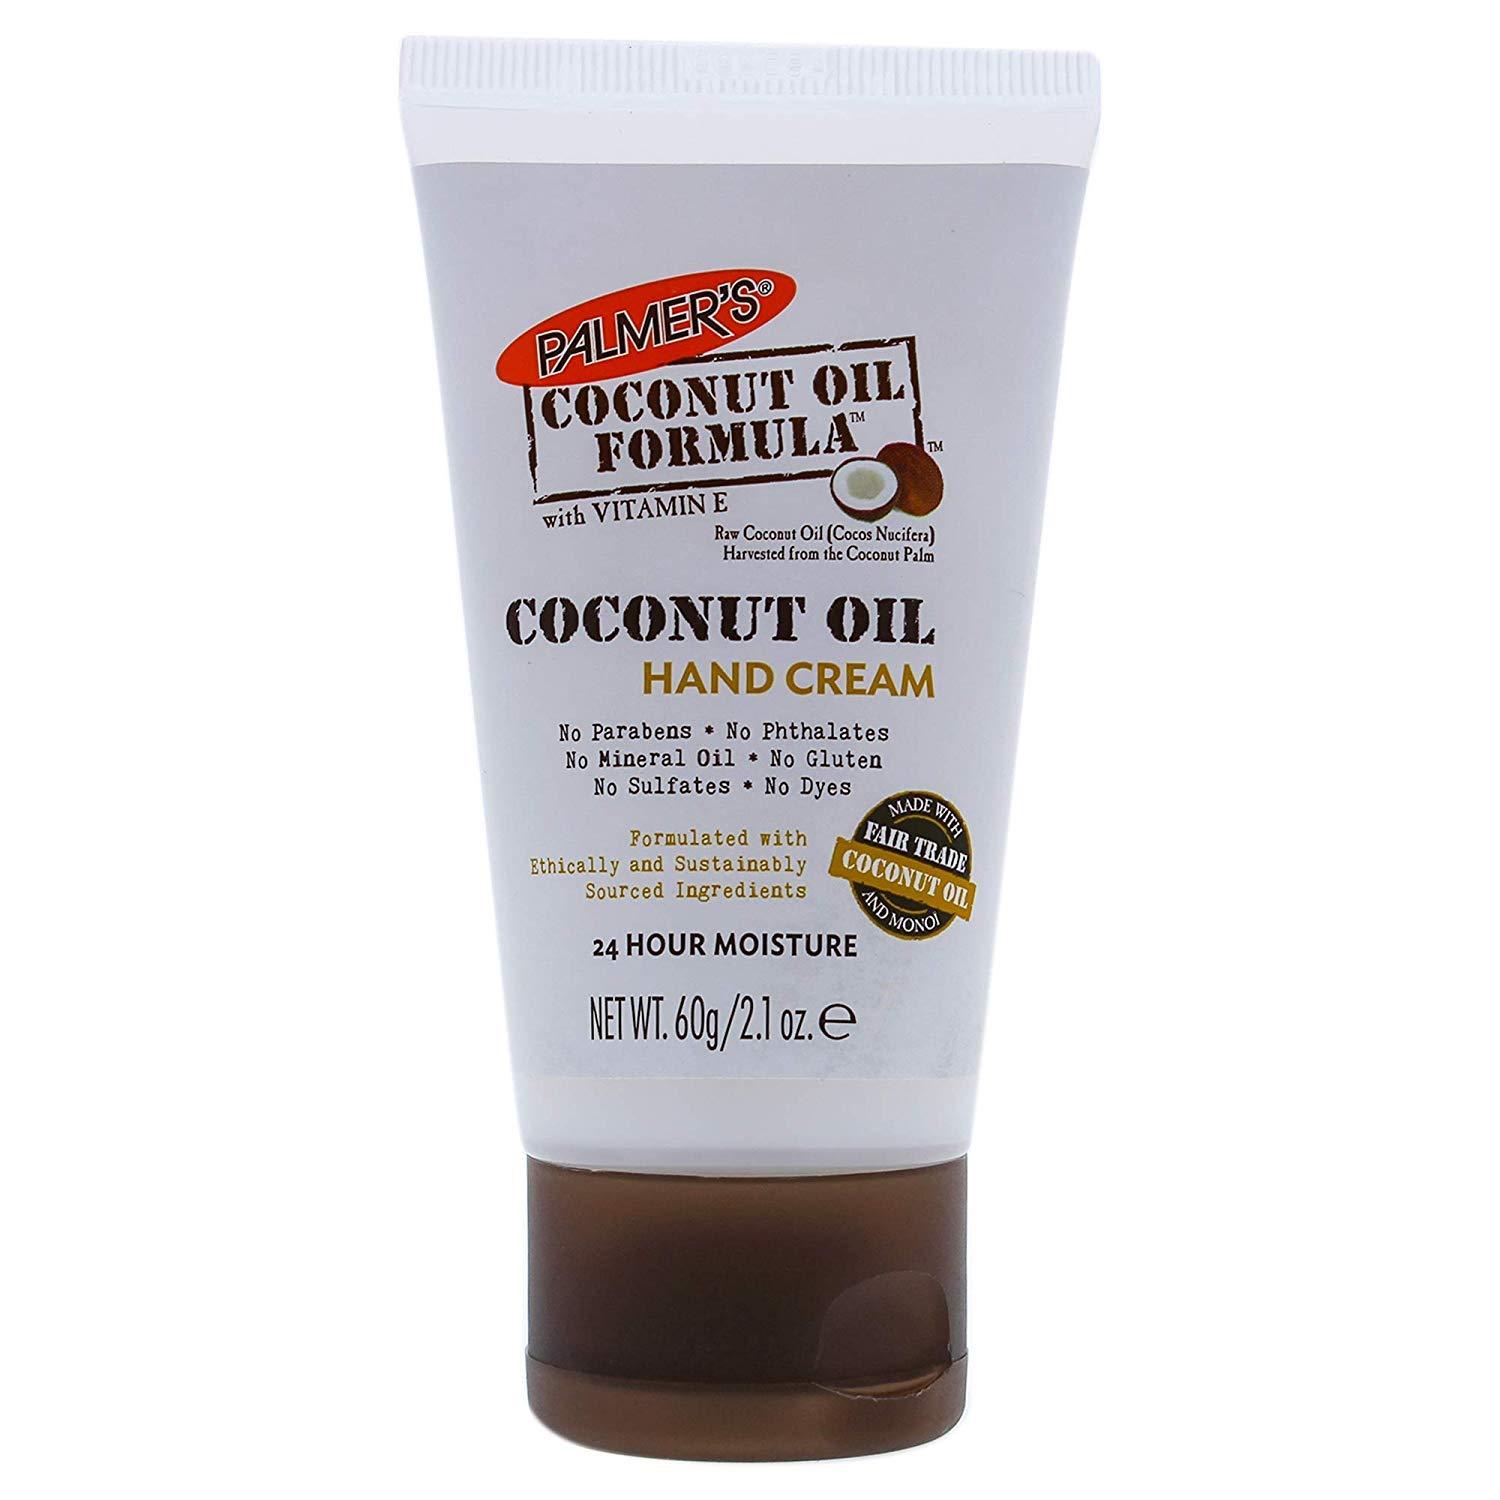 3 Palmers Coconut Oil Hand Cream for $4.95 Shipped